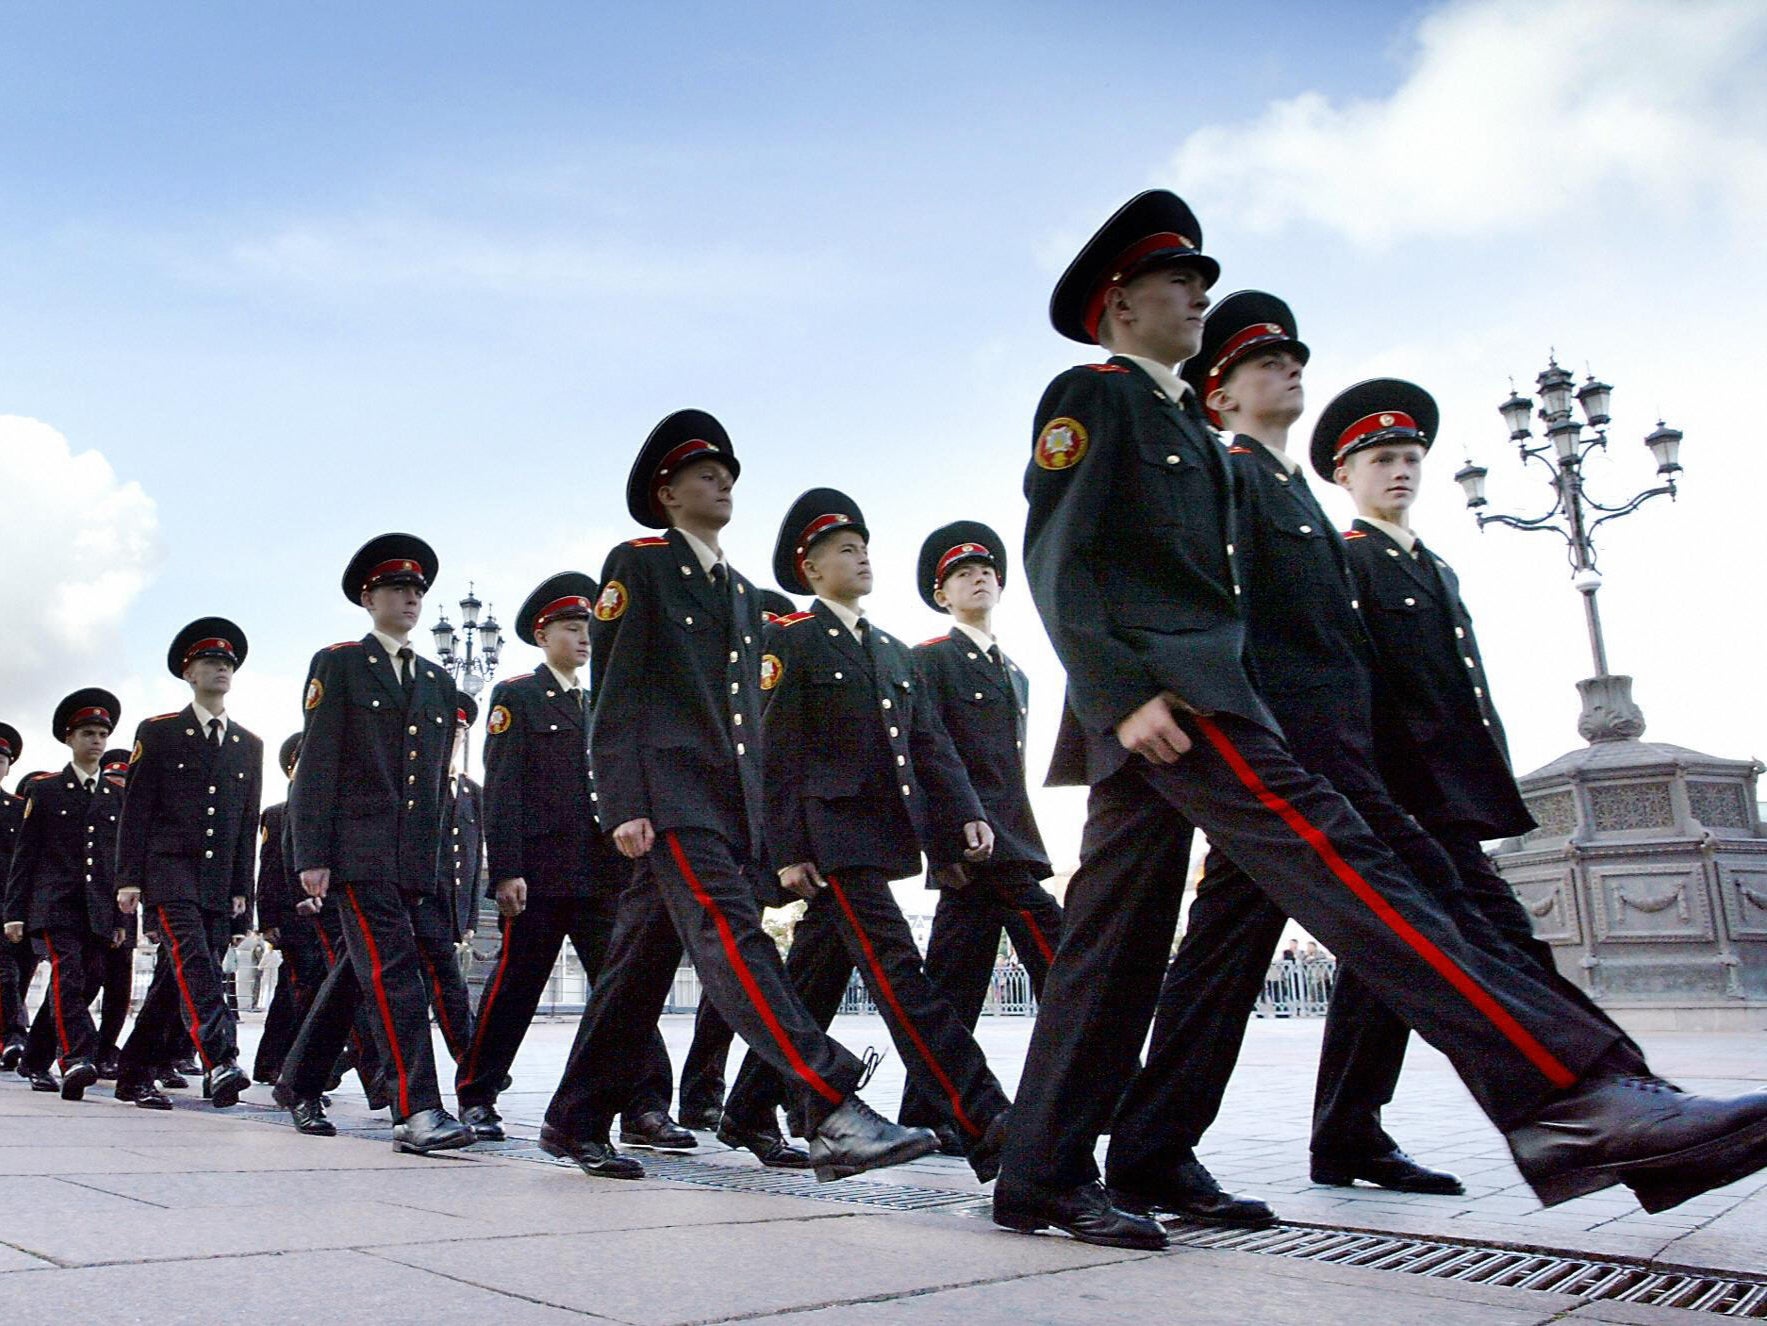 Military school cadets in Moscow march outside the cathedral of Christ the Saviour during a ceremony marking the beginning of their education